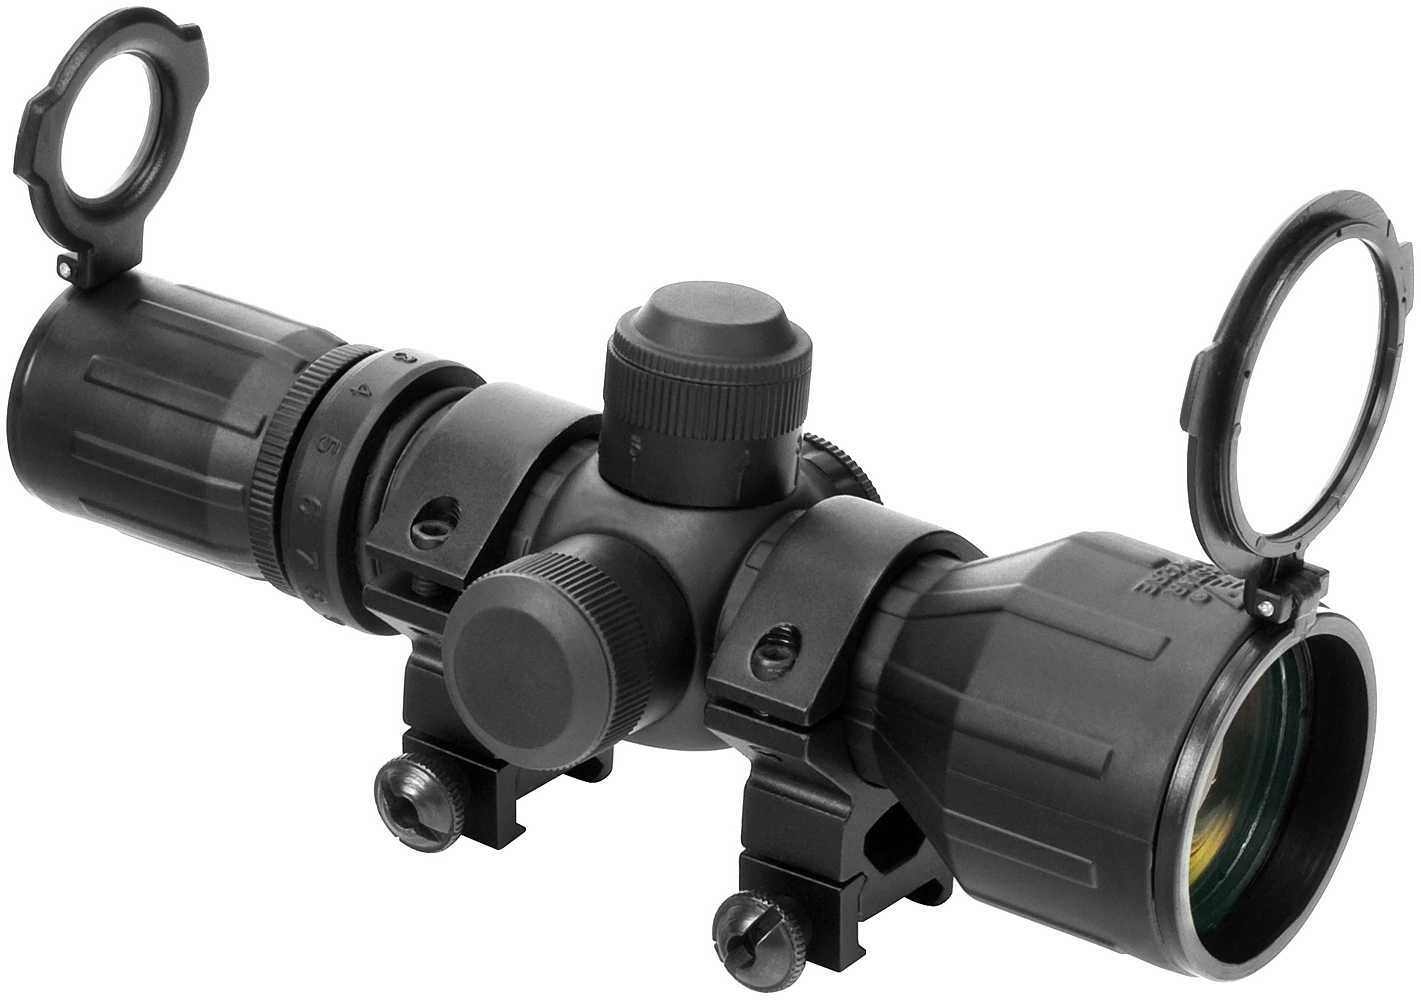 NcStar Rubber Tactical-Double Illumination Series Scope 3-9x42 Red/Green Illuminated Reticle, Ruby Lens SEECR3942R